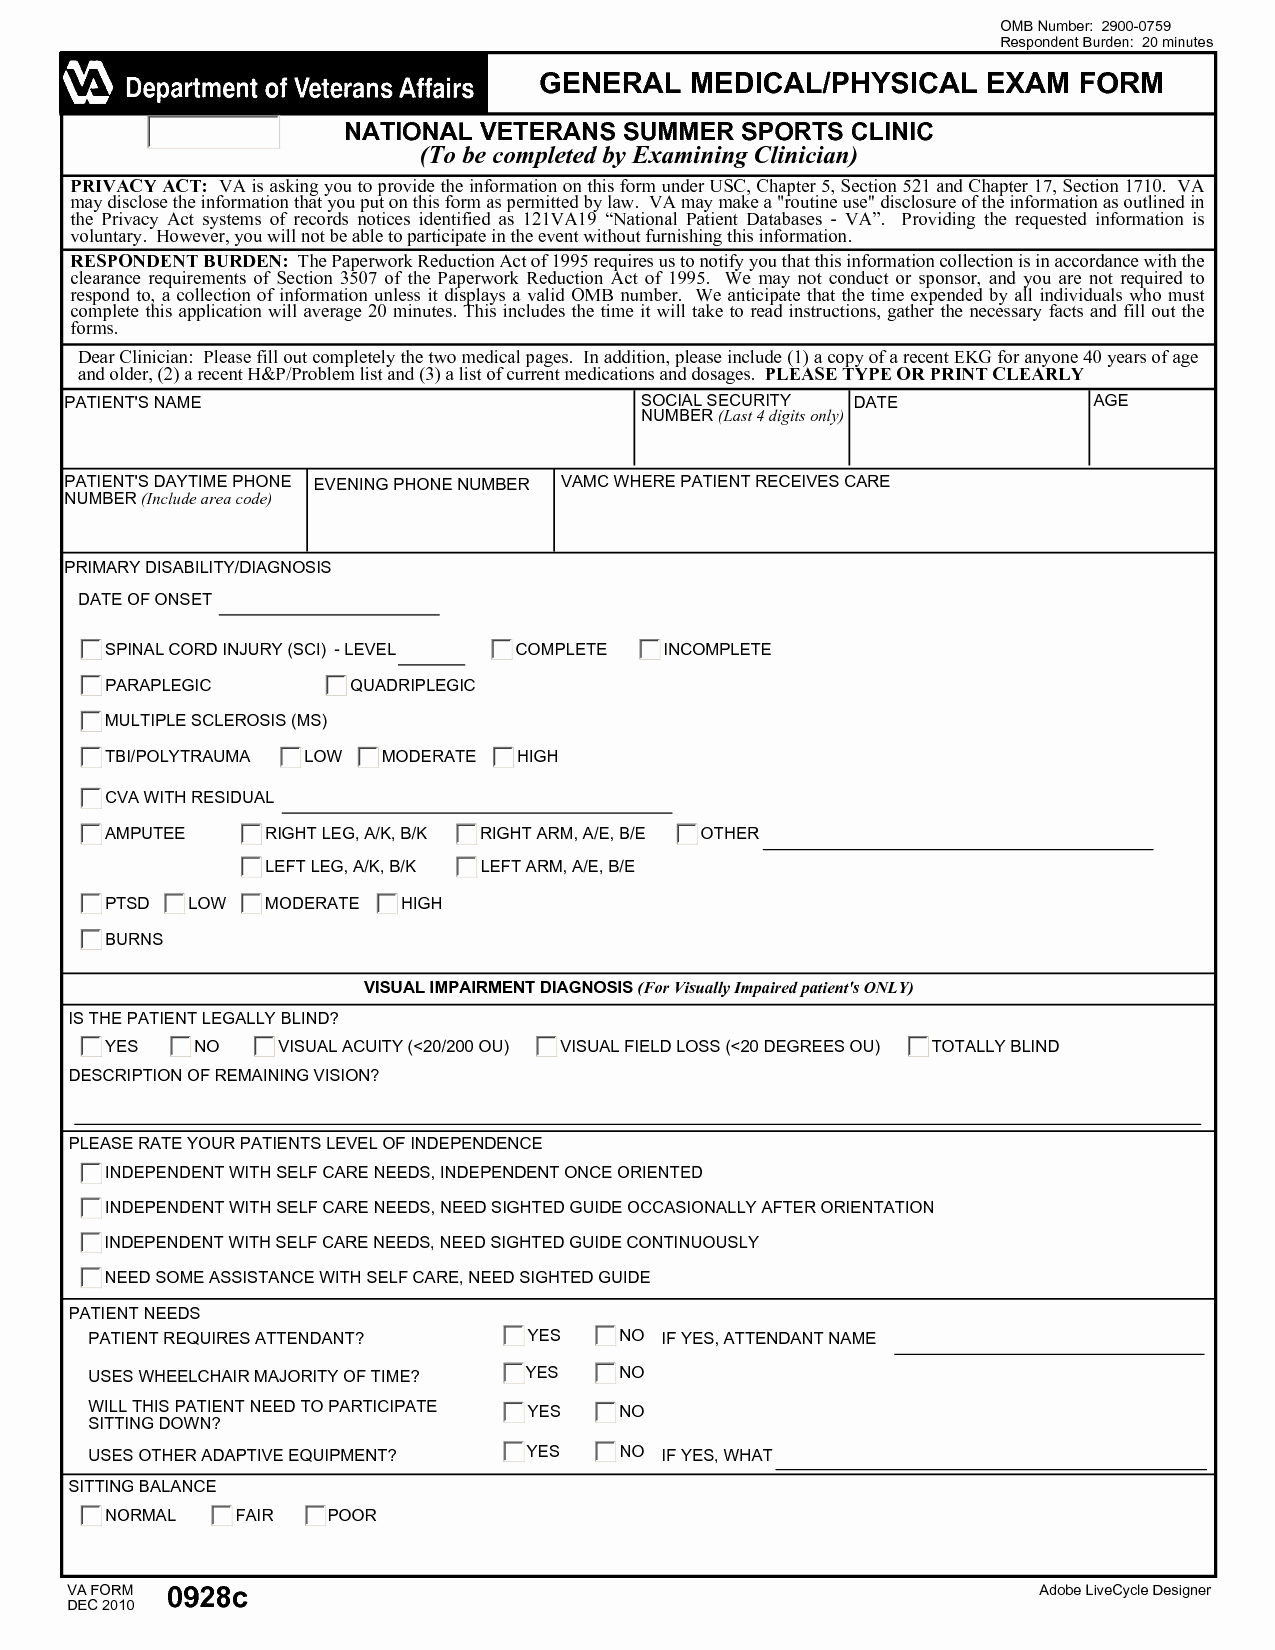 Physical Examination form for Work Fresh Work Physical Exam Blank form Bing Images